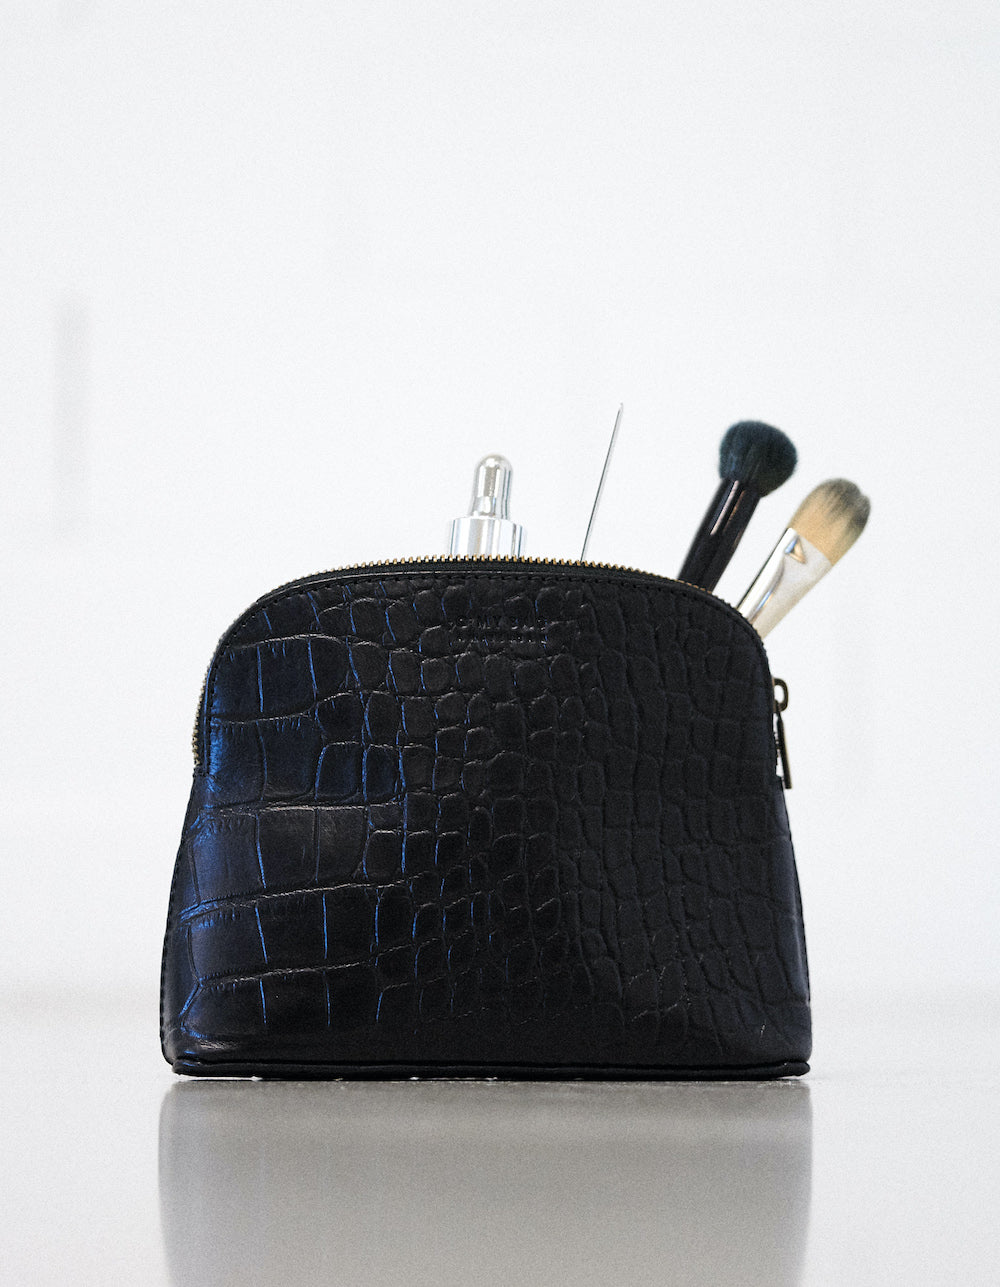 Cosmetic bag. Rectangle shape, black croco leather. Front picture with brushes